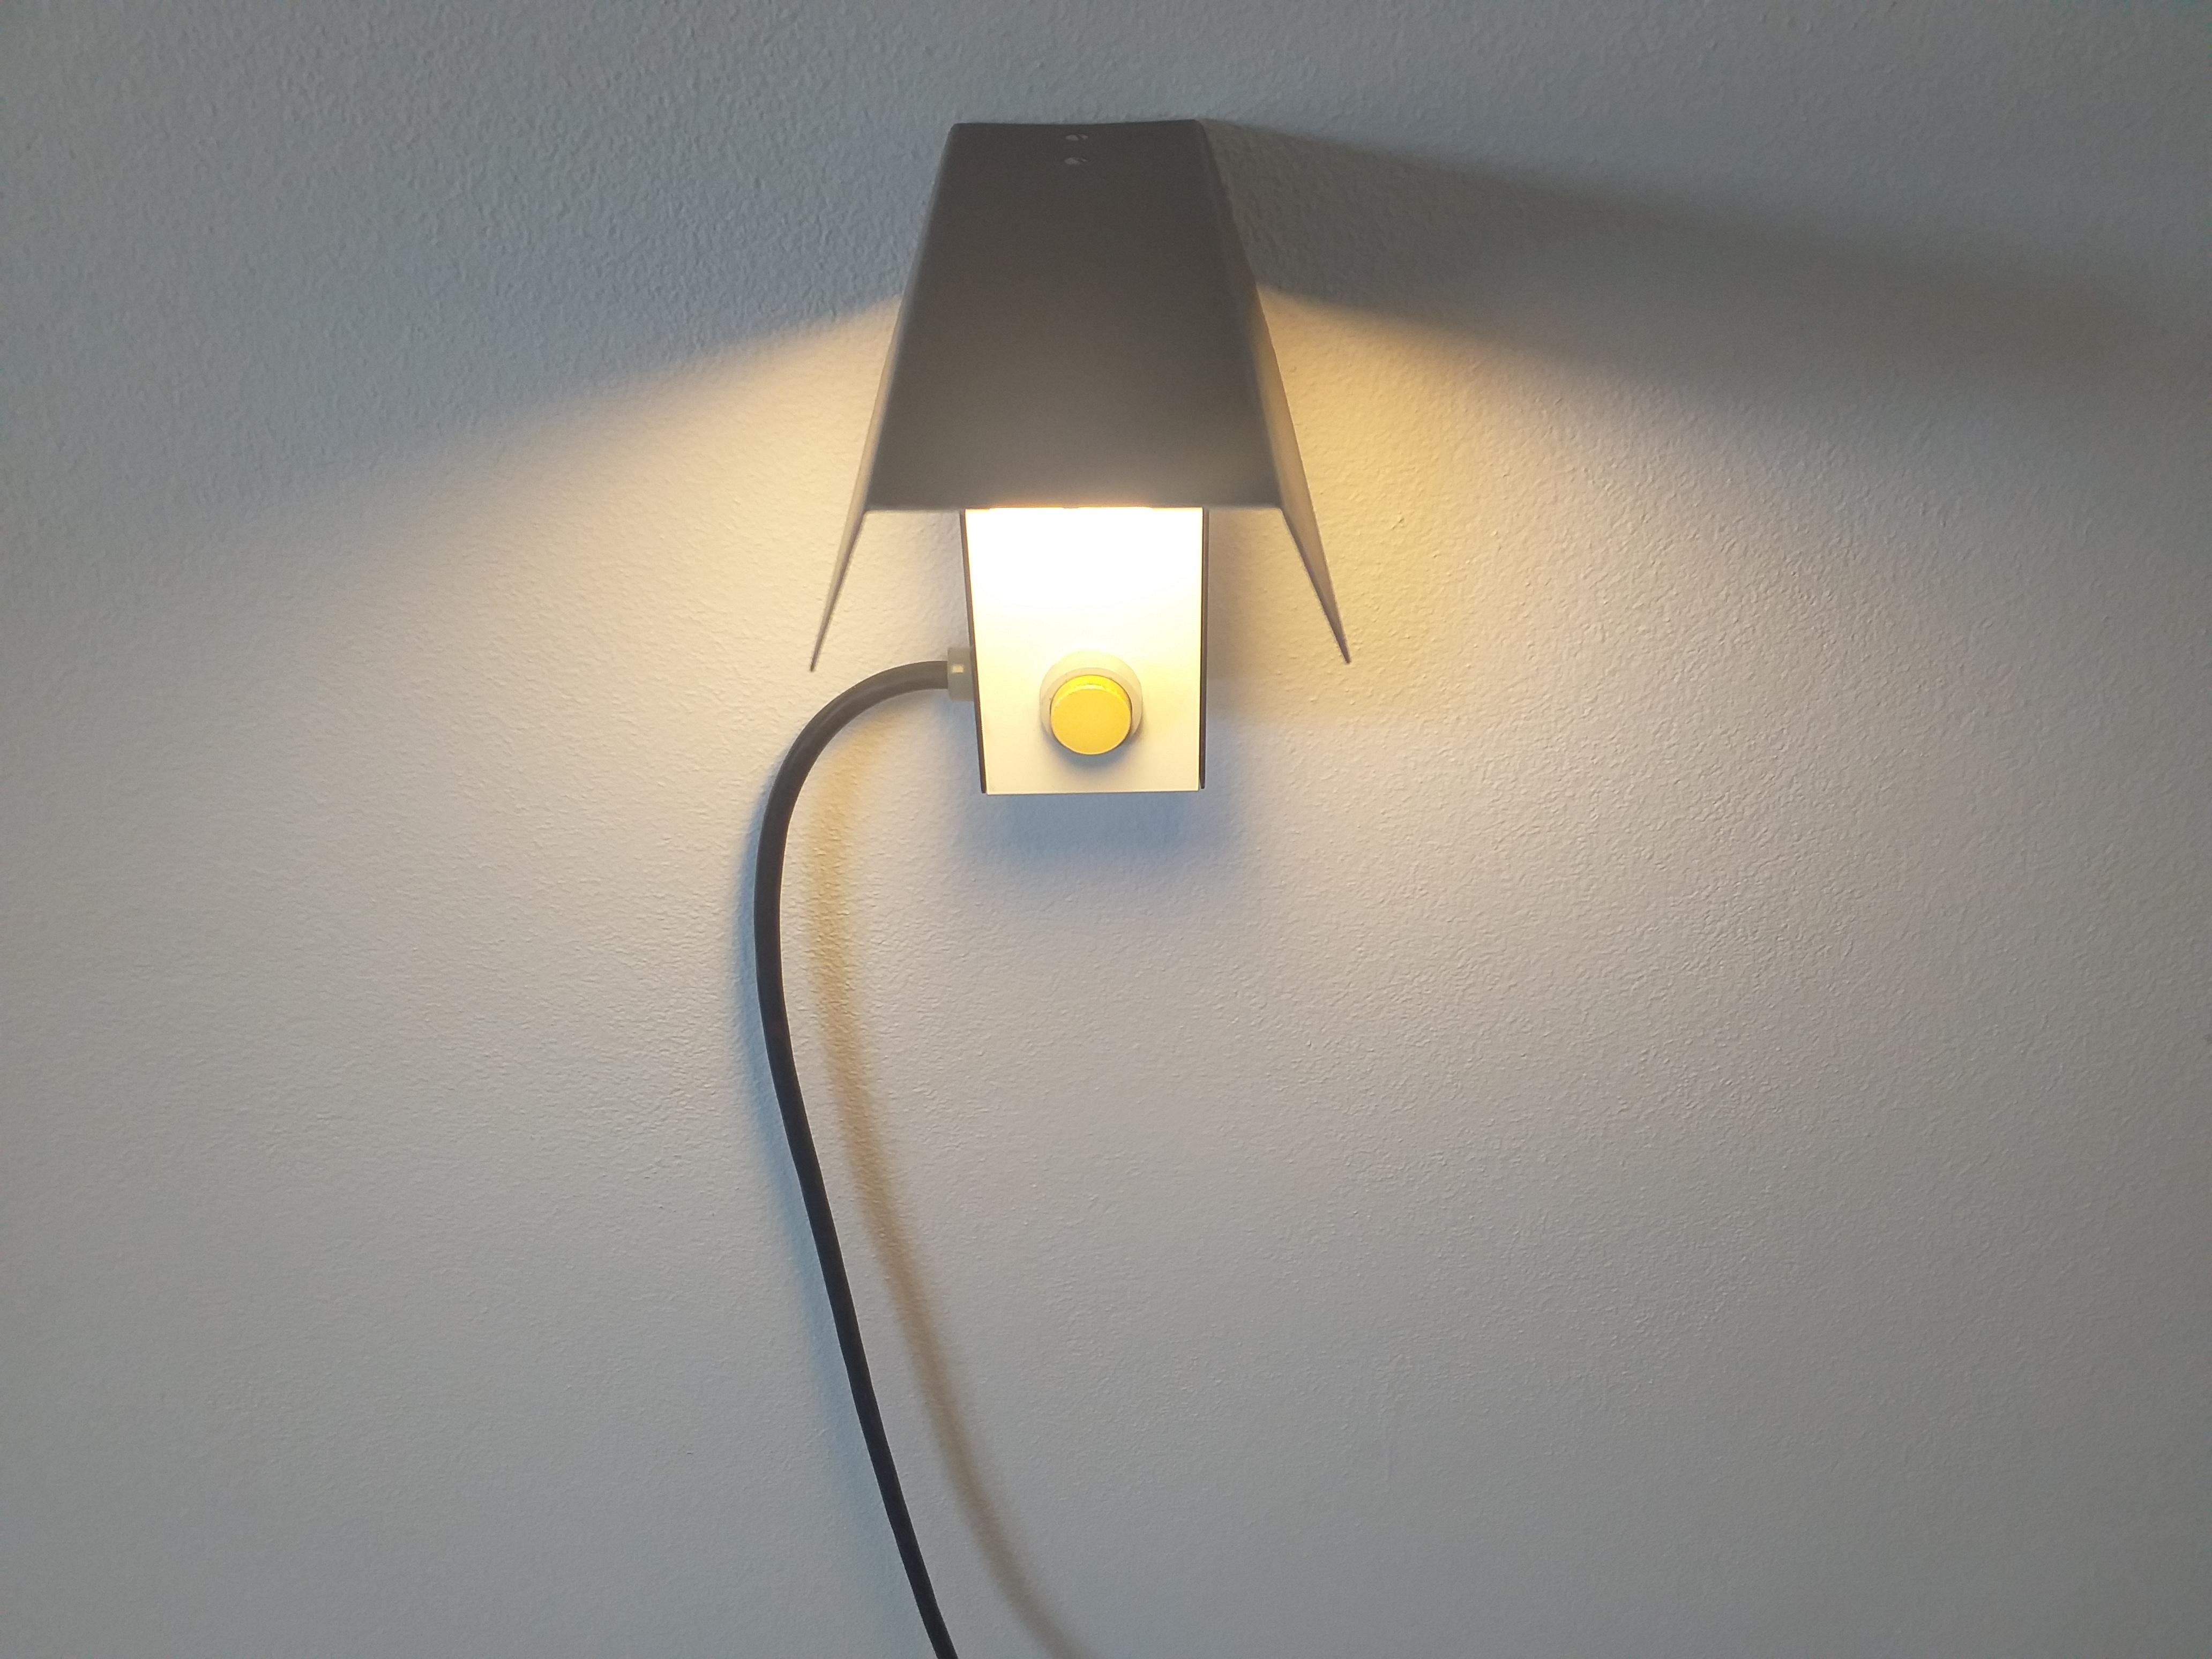 Czech Midcentury Table or Wall Lamp Napako Designed by Josef Hurka, 1970s For Sale